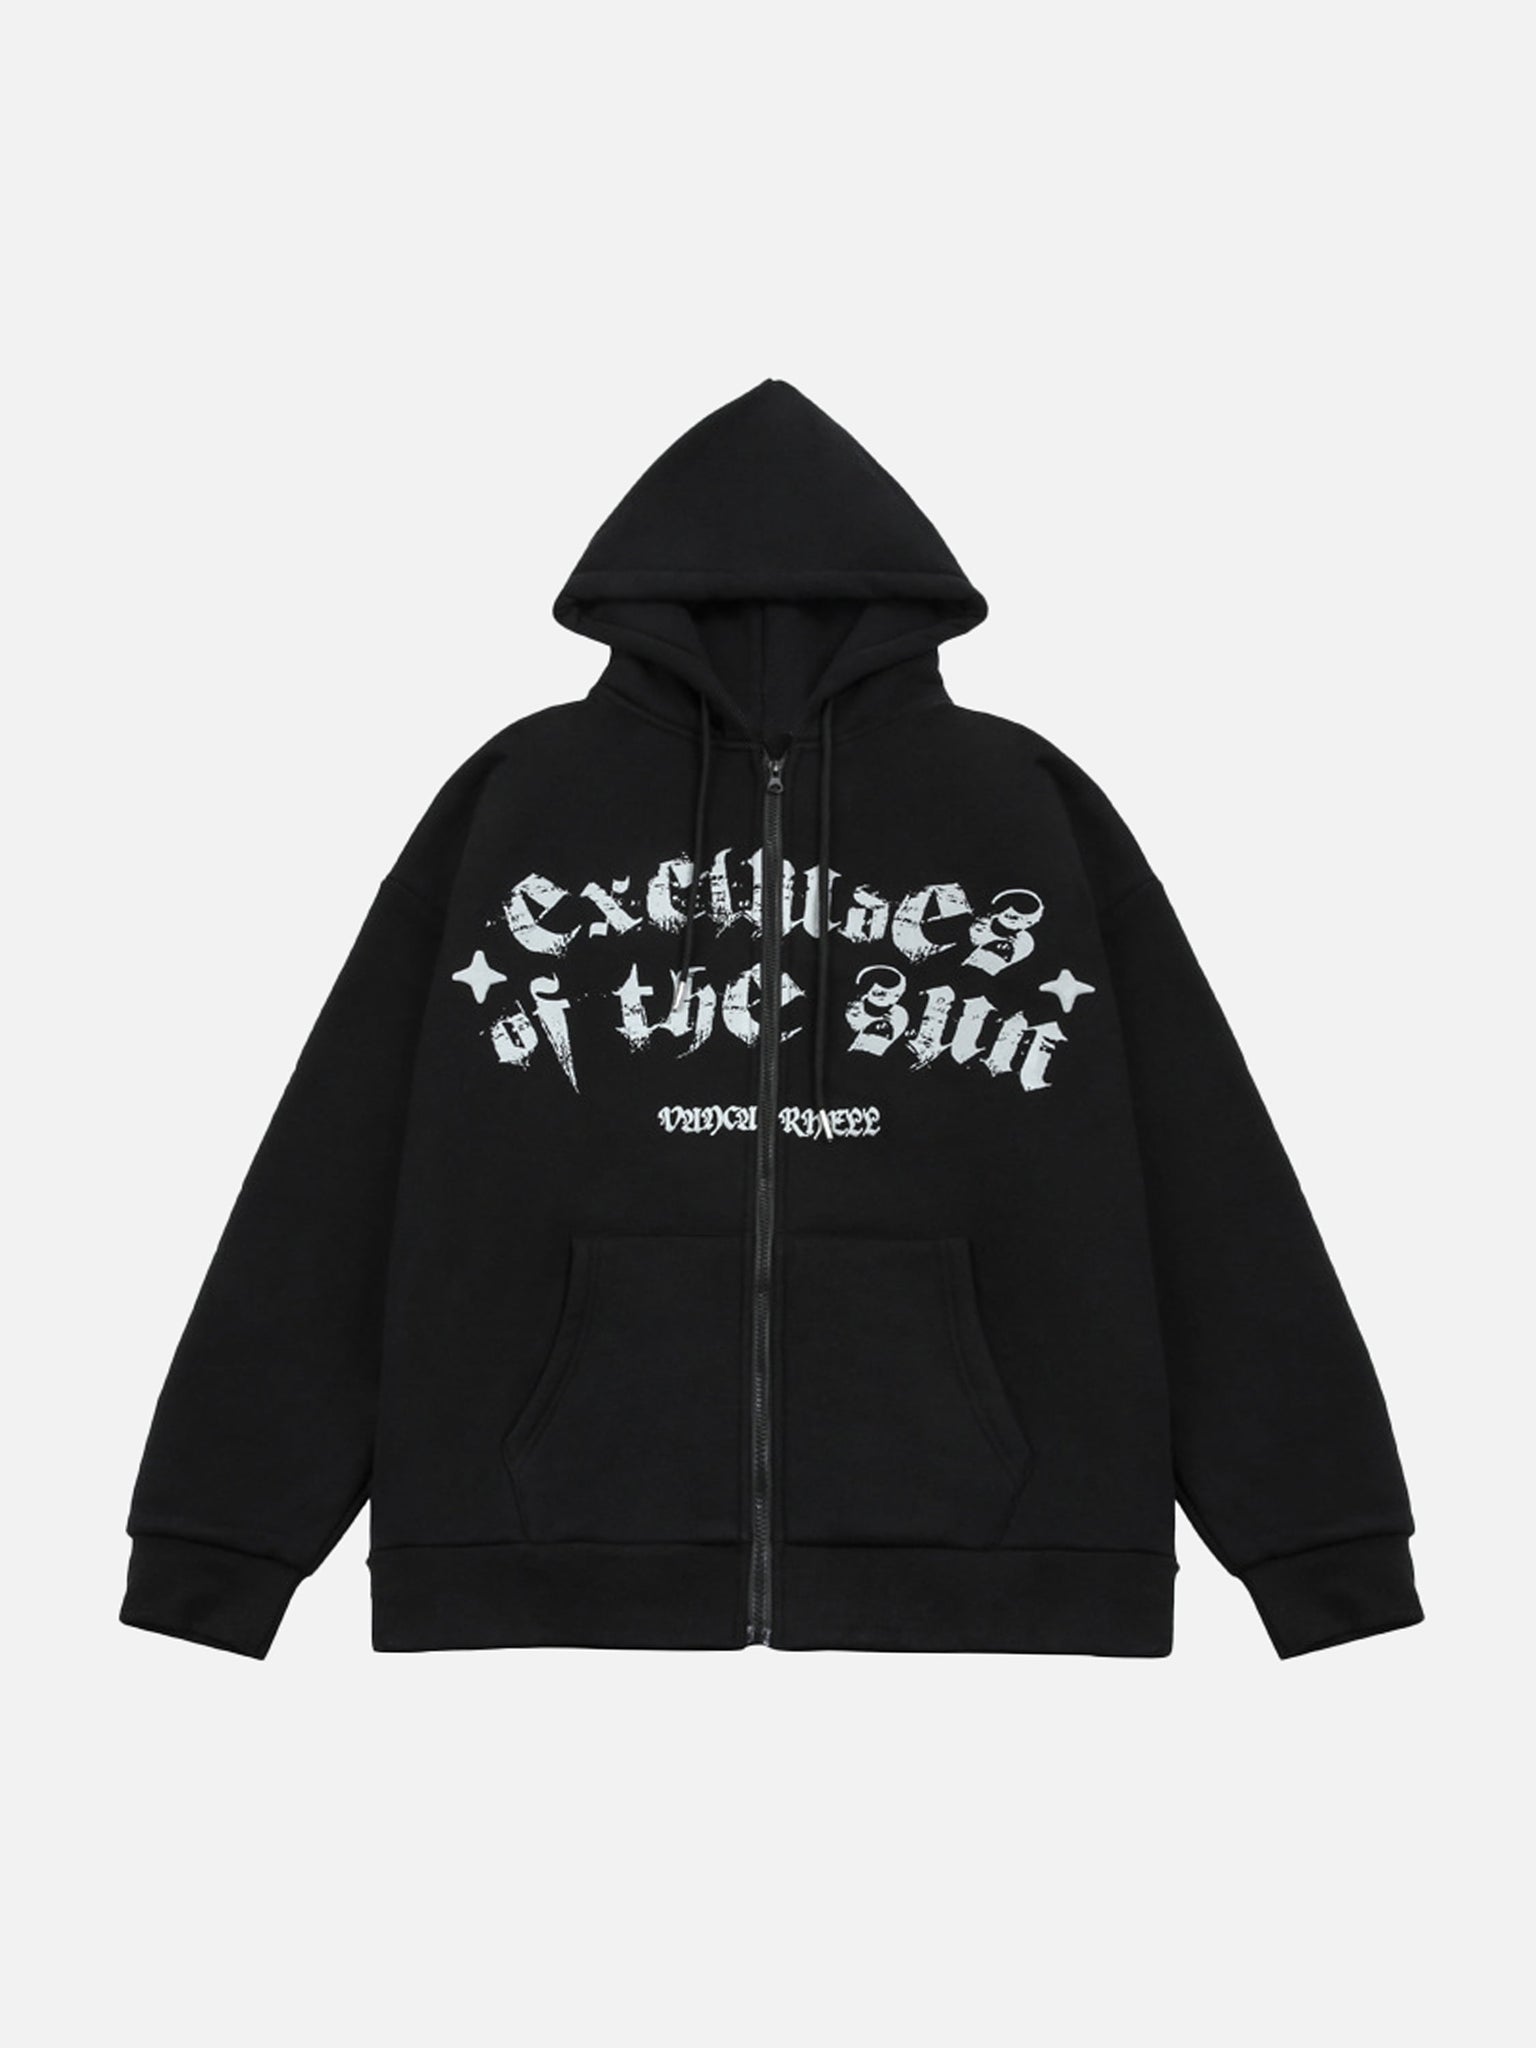 The Supermade American High Street Letter Print Padded Hoodie Jacket